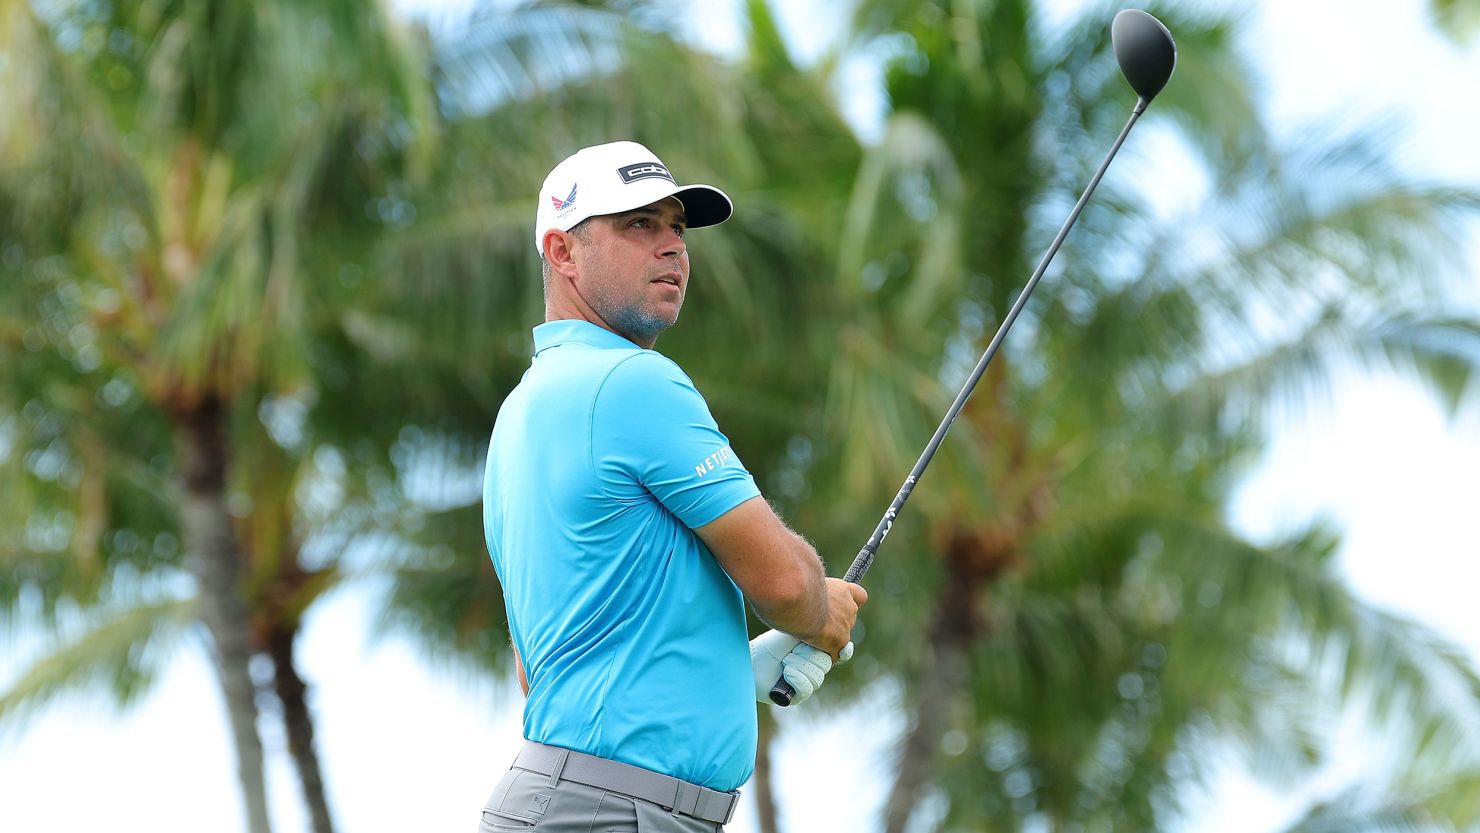 HONOLULU, HAWAII - JANUARY 09:  Gary Woodland of the United States tees off the 14th hole during a practice round prior to the Sony Open in Hawaii at Waialae Country Club on January 09, 2024 in Honolulu, Hawaii. (Photo by Kevin C. Cox/Getty Images)